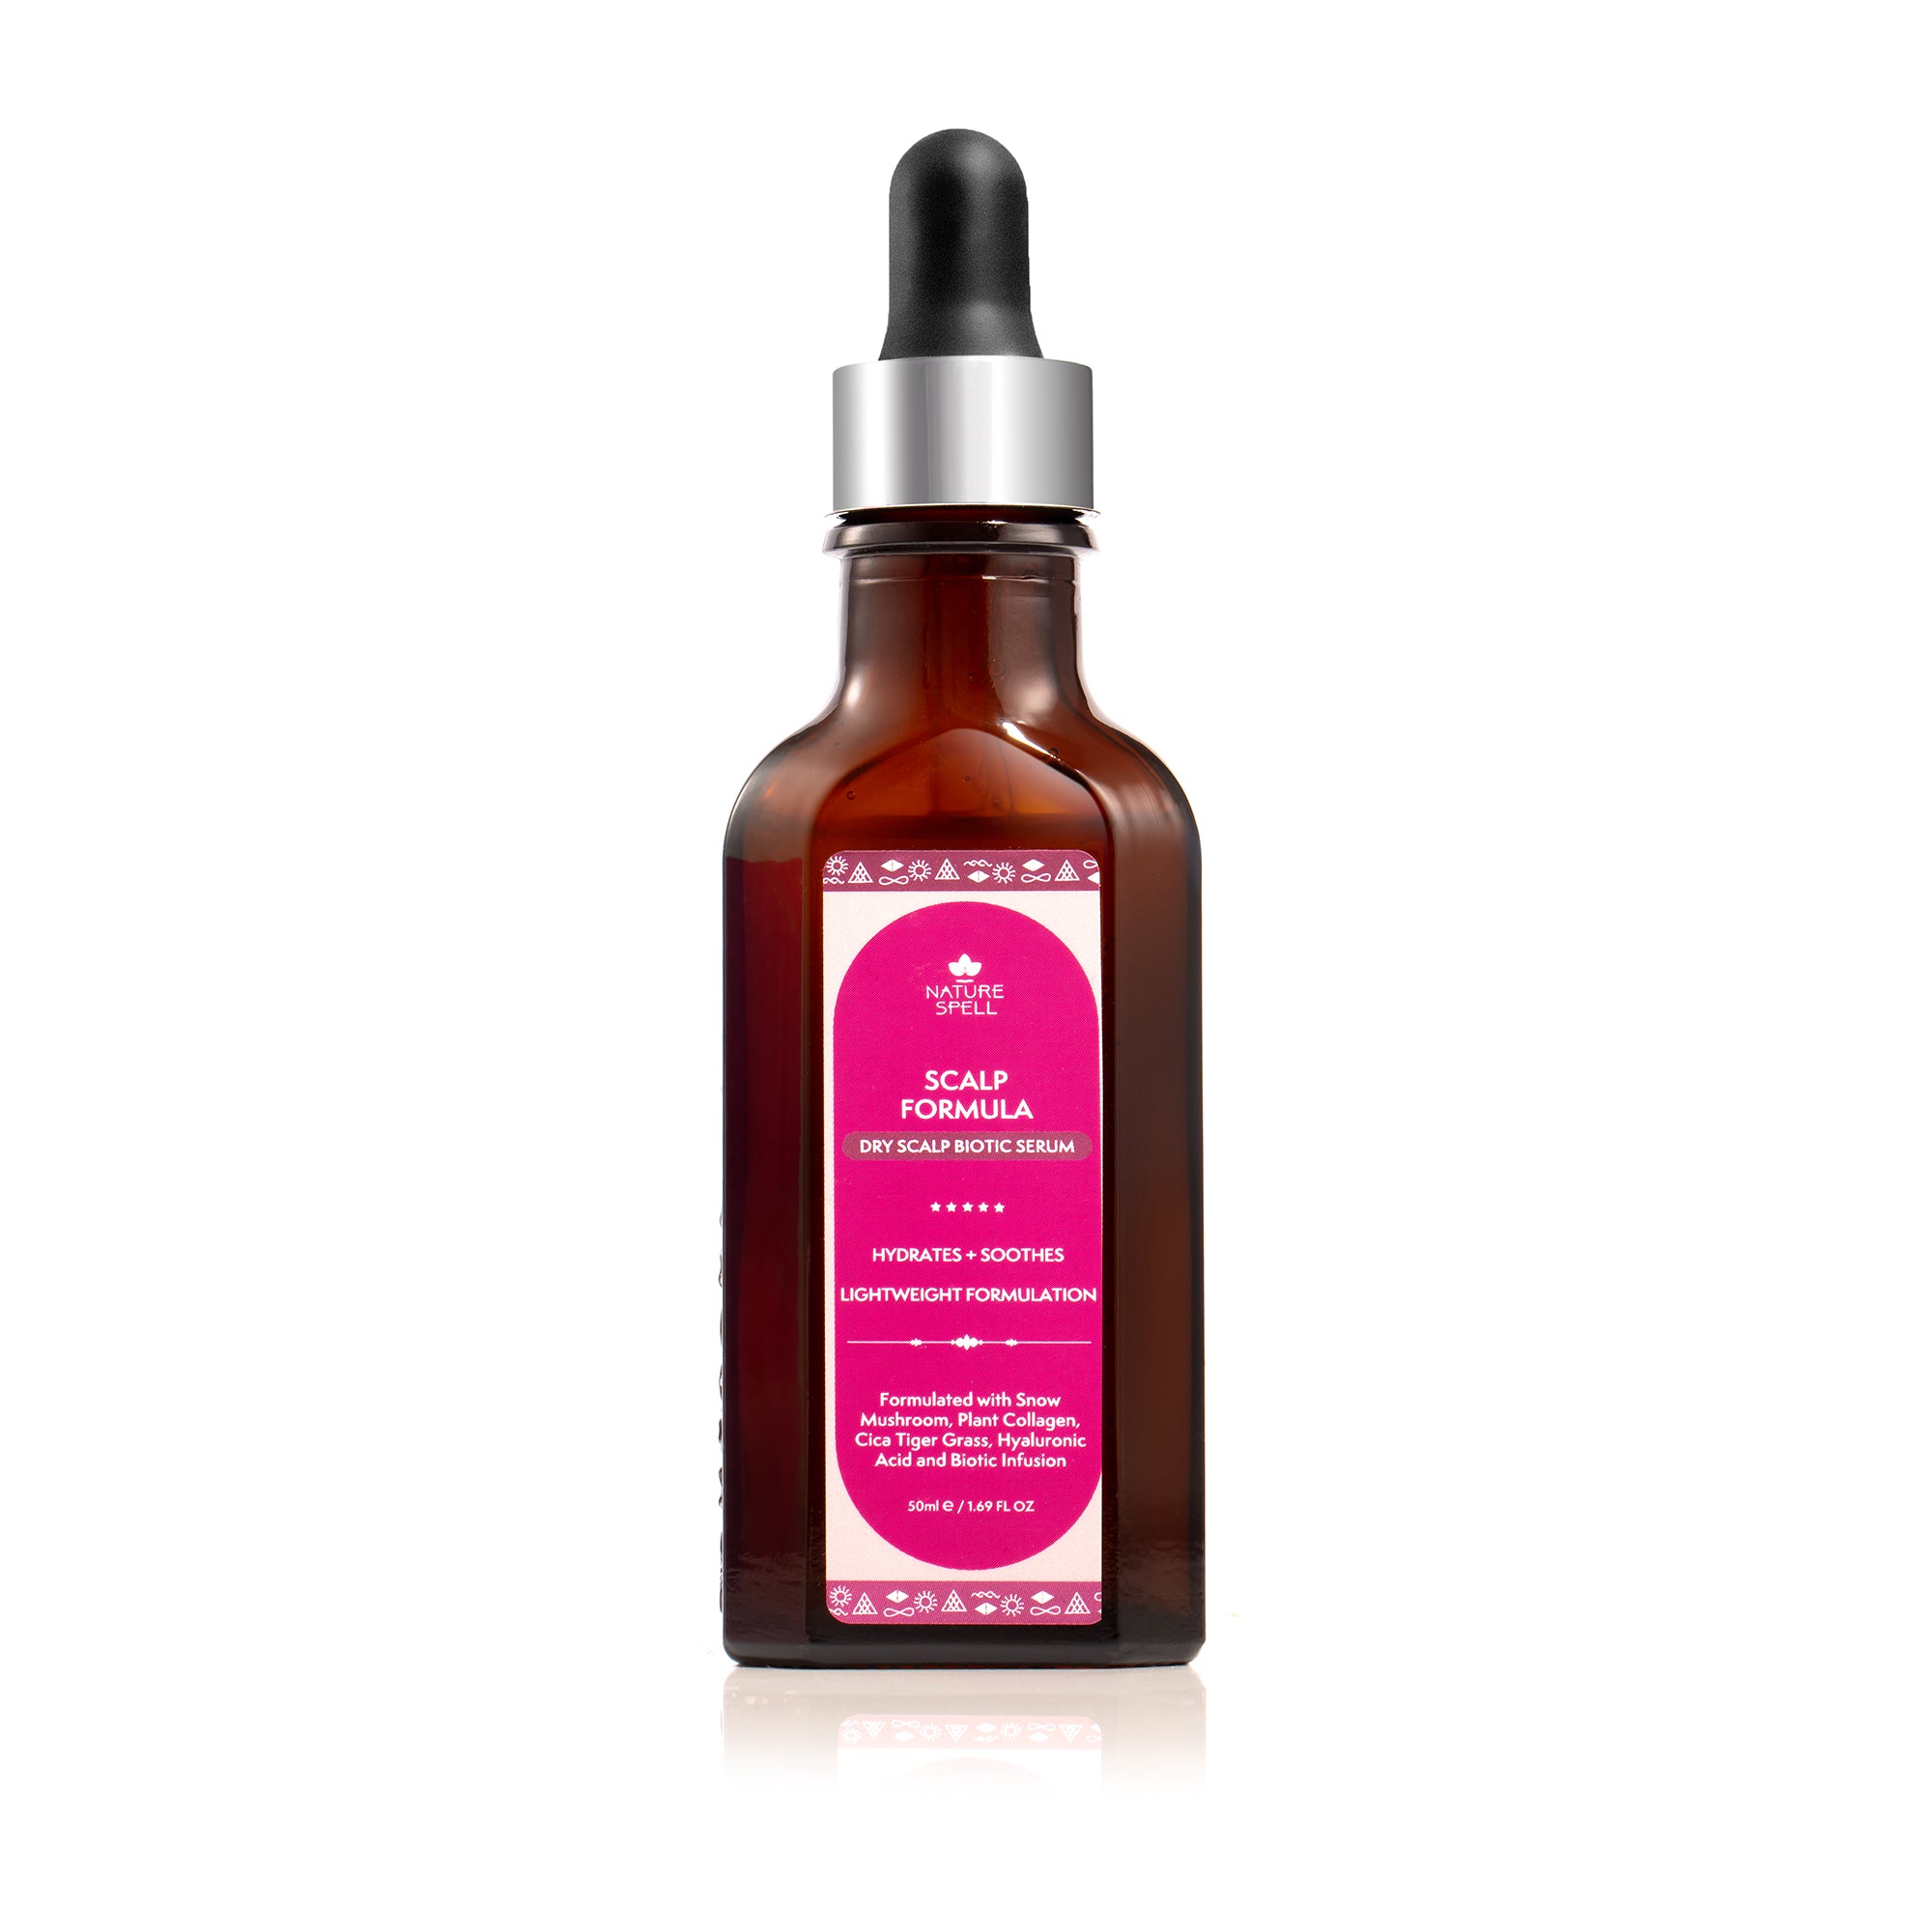 Dry Scalp Formula - Calm & Clear Biotic Serum for Dry Scalp with Hyaluronic Acid + Plant Collagen